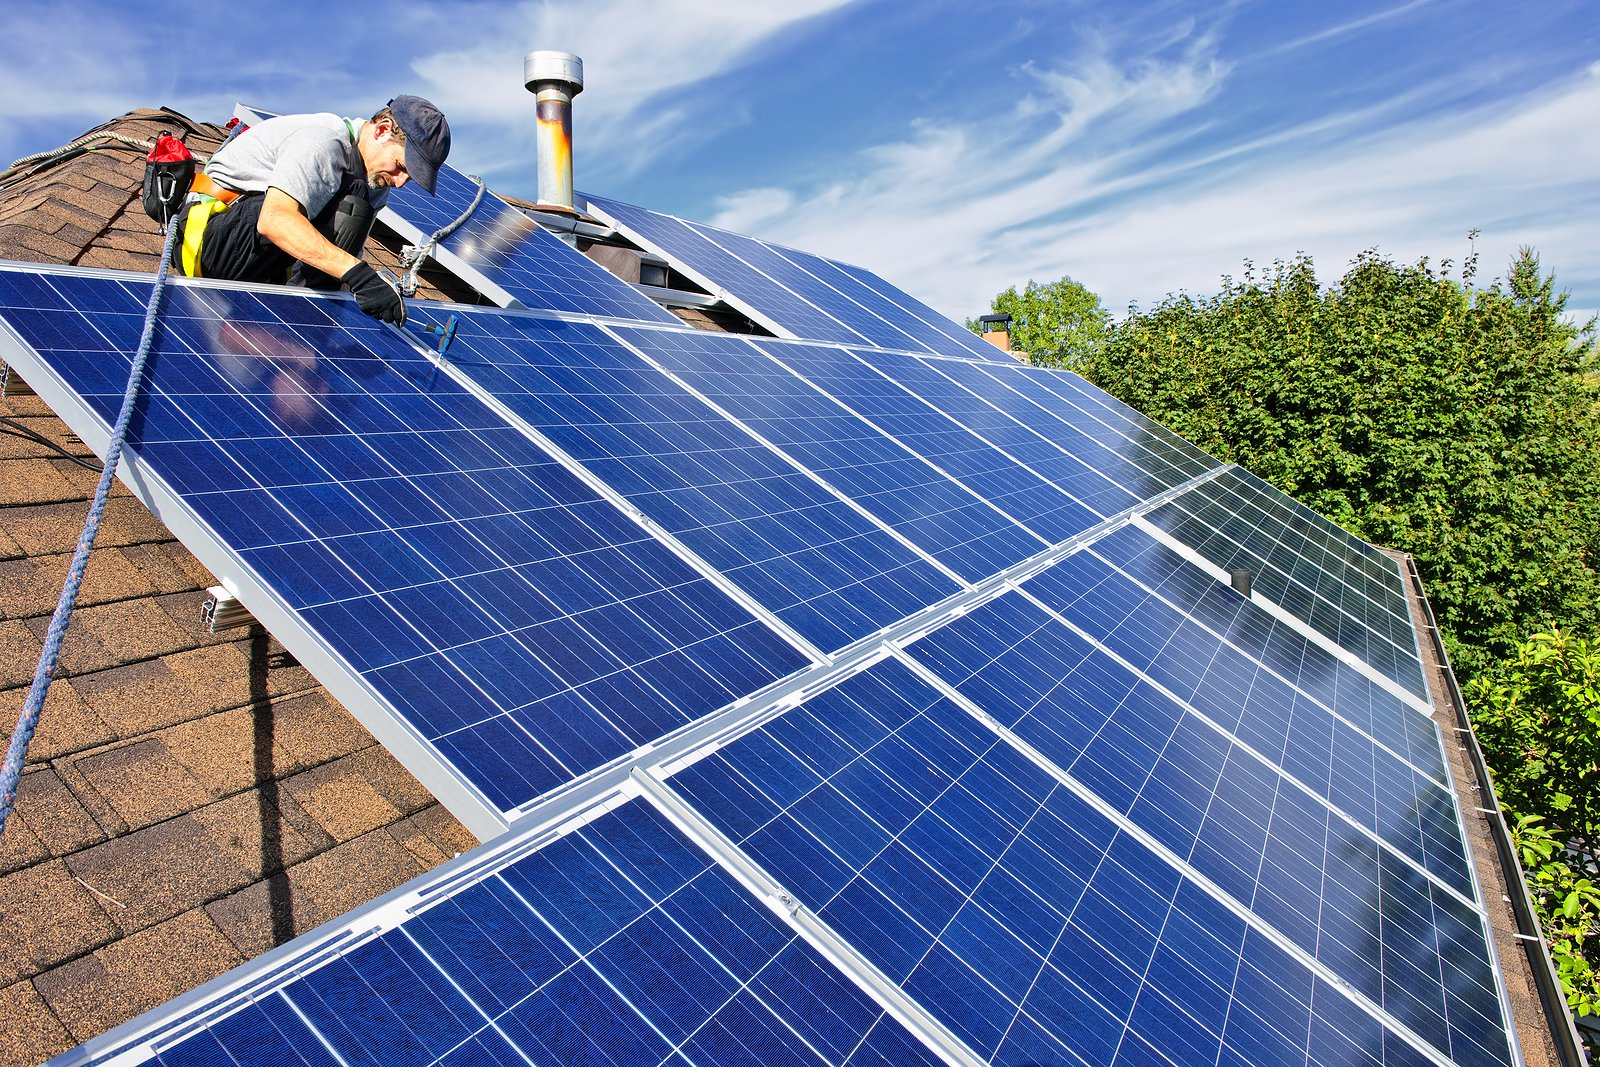 Installing Solar Panels Can Increase Your Home’s Value When it Comes Time to Sell